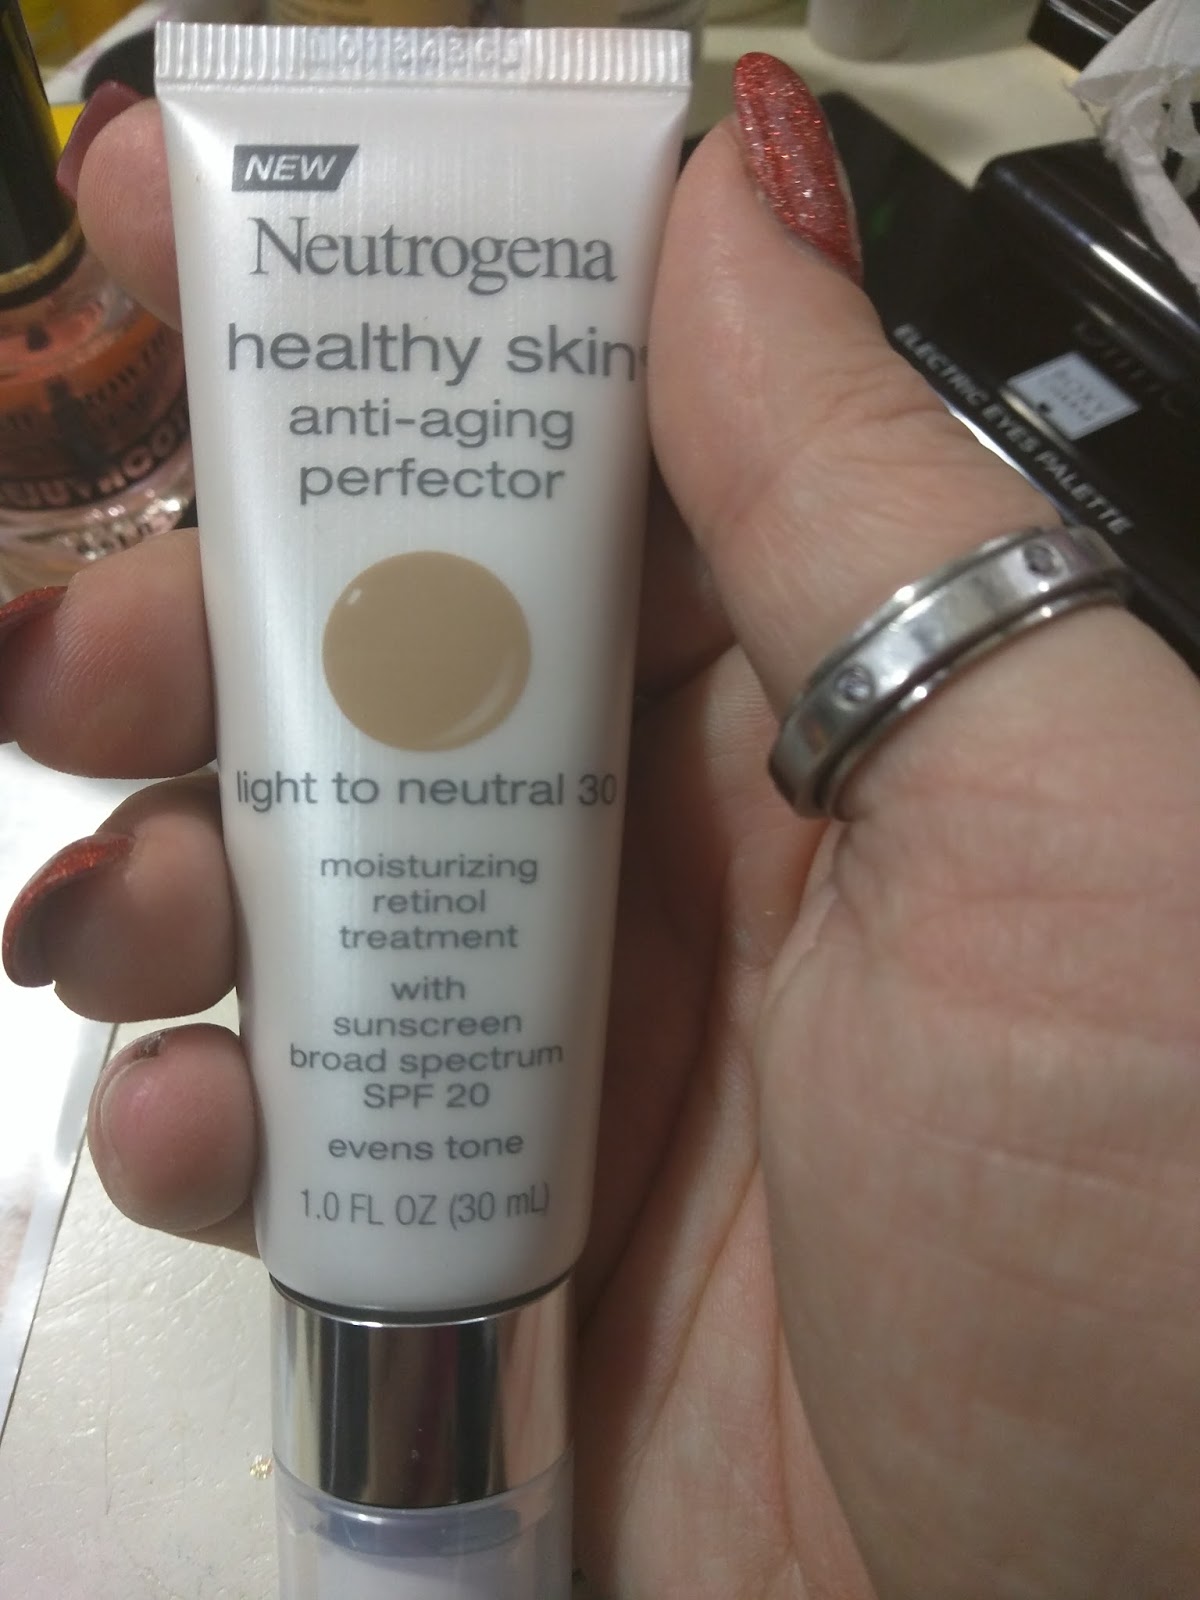 LAURIE ANN: NEUTROGENA HEALTHY SKIN ANTI AGING PERFECTOR REVIEW